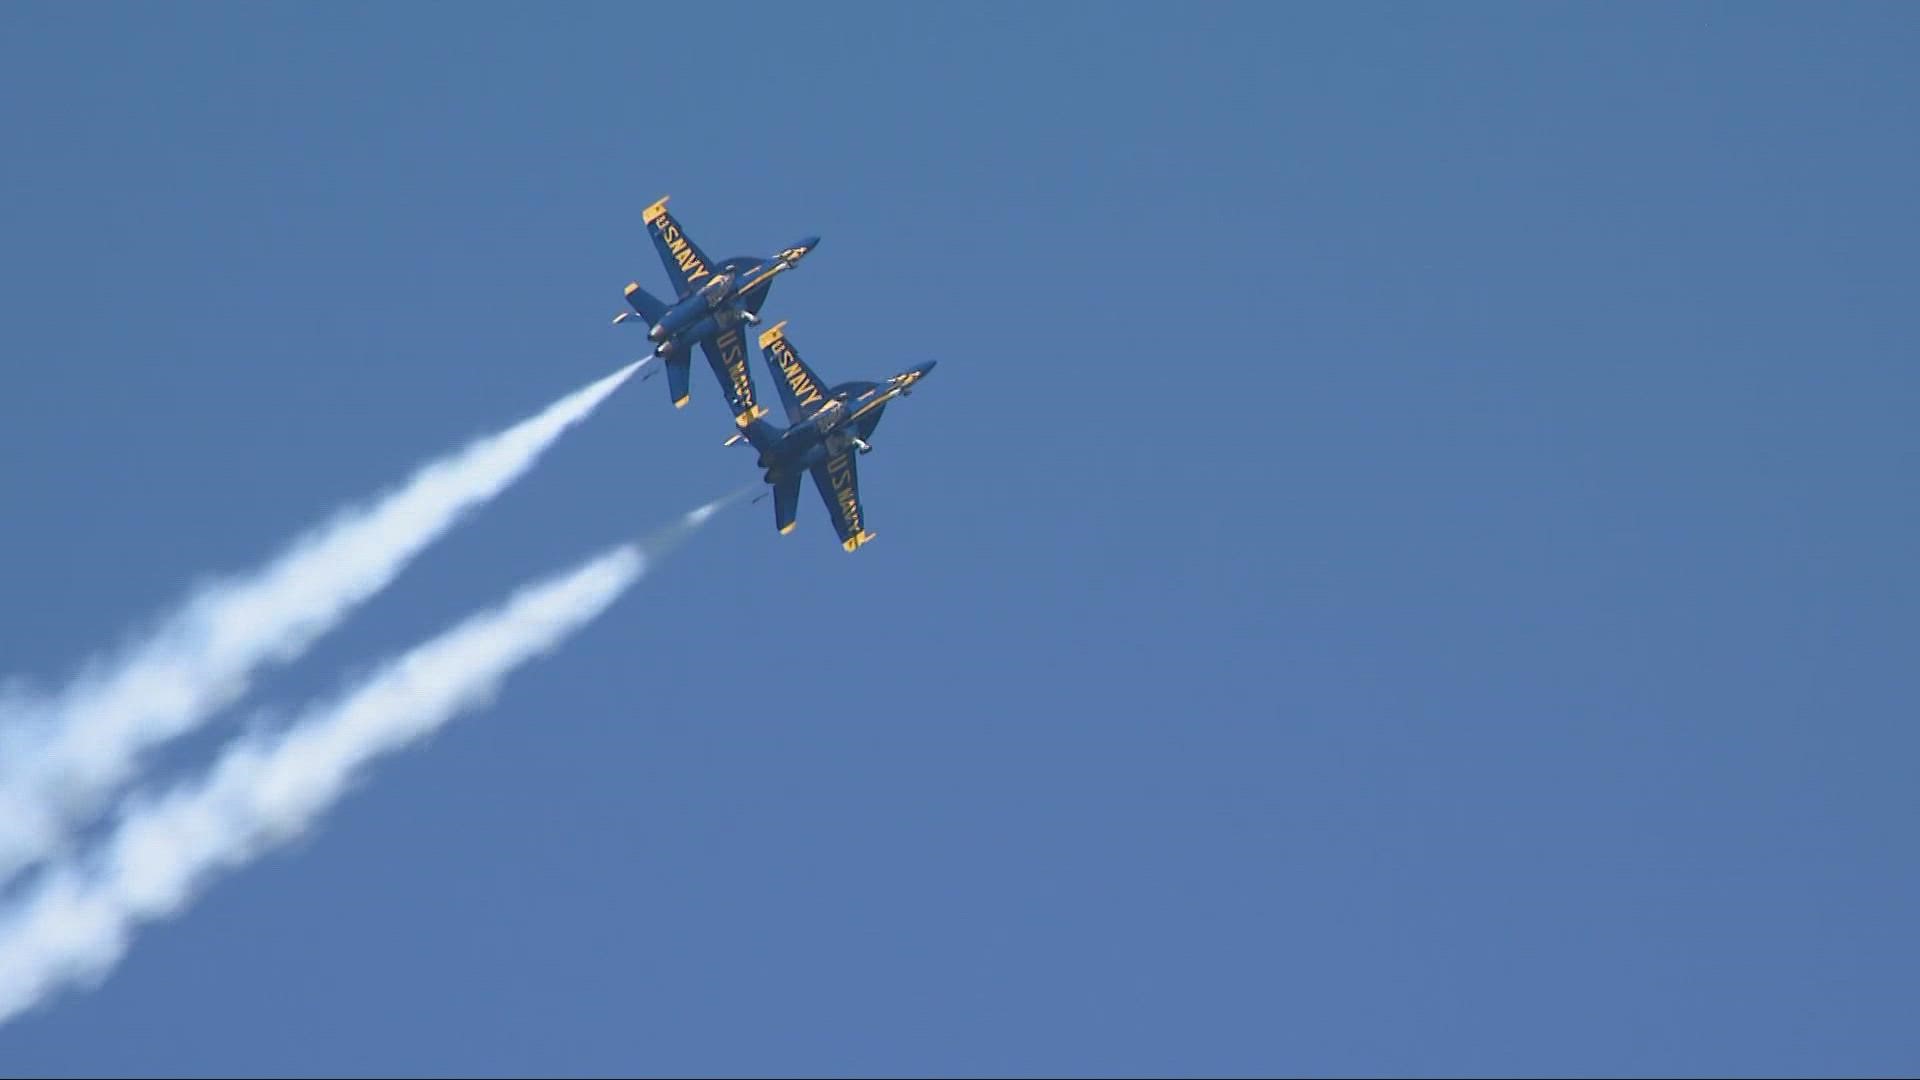 From the air show to the Guardians, there's plenty to do throughout the area!